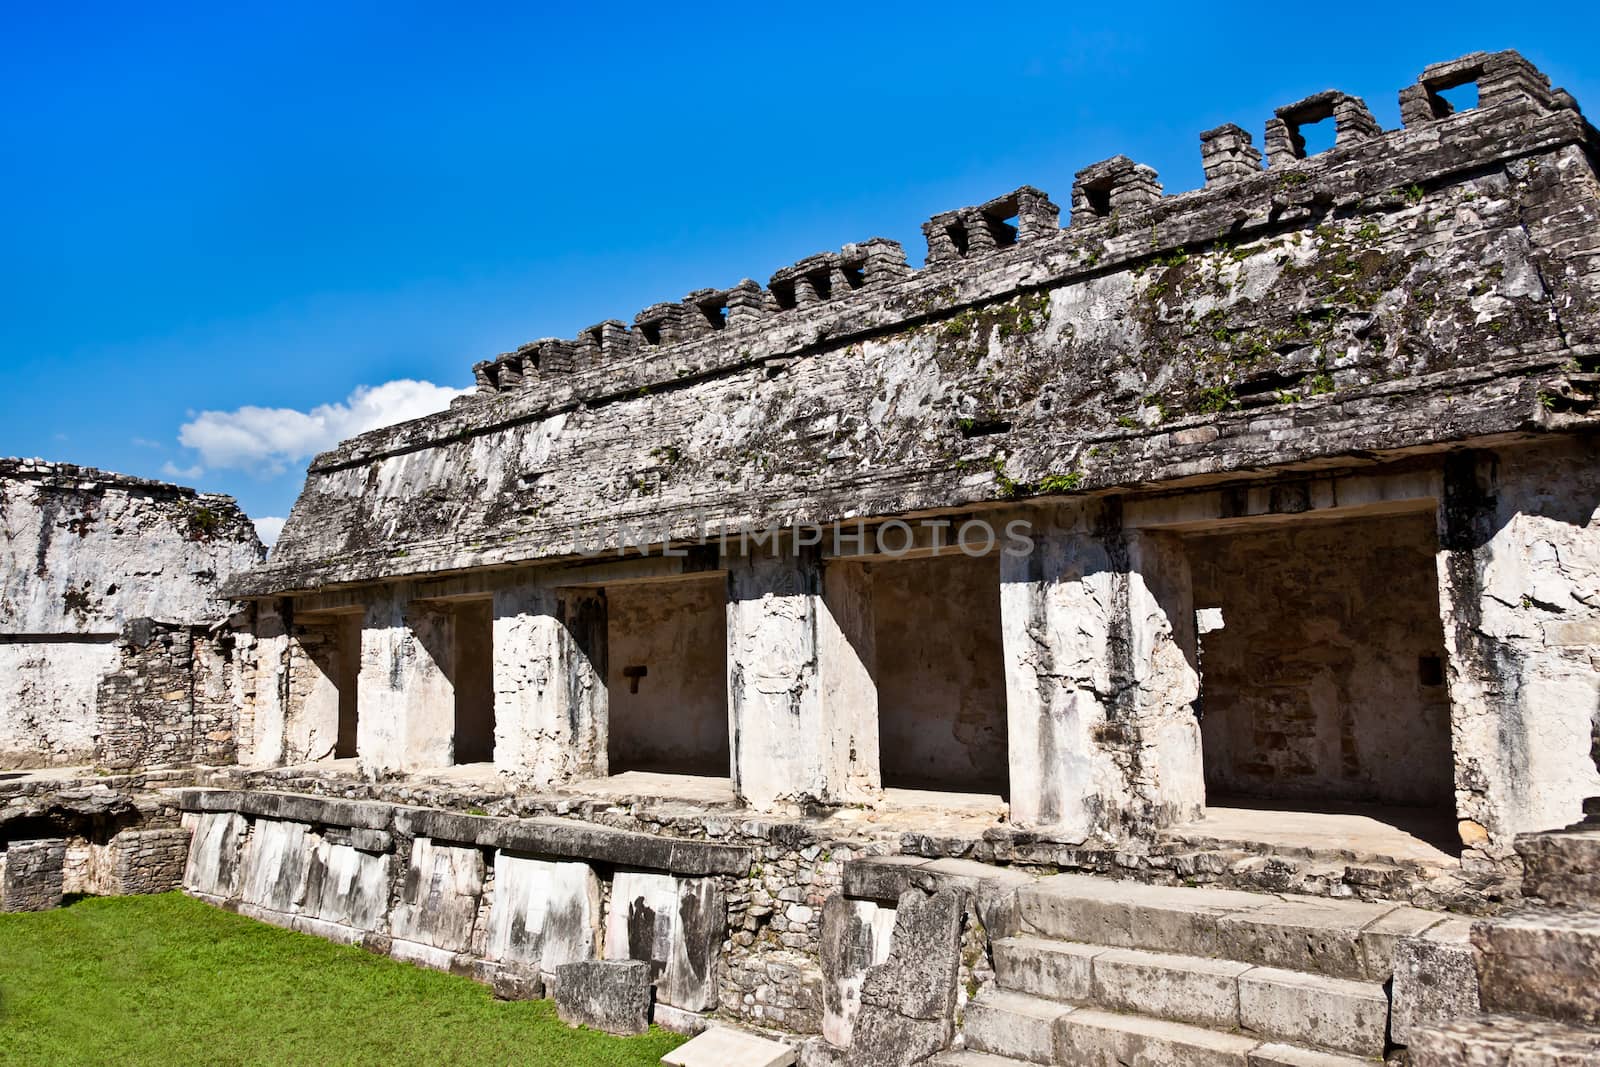 Temple of Palenque, an ancient mayan ruin, located in Palenque, Yucatan, Mexico